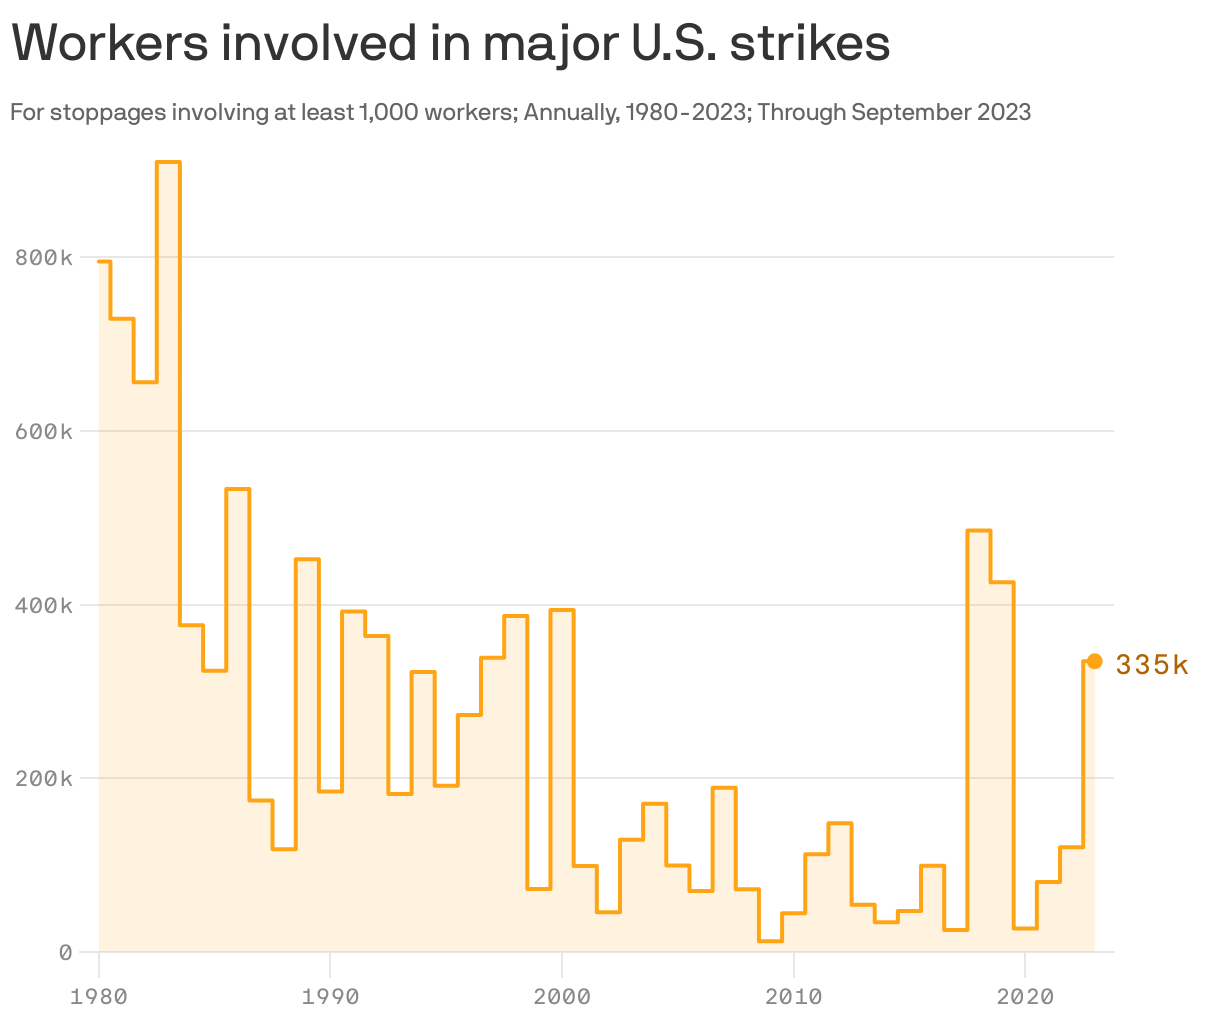 Workers involved in major U.S. strikes